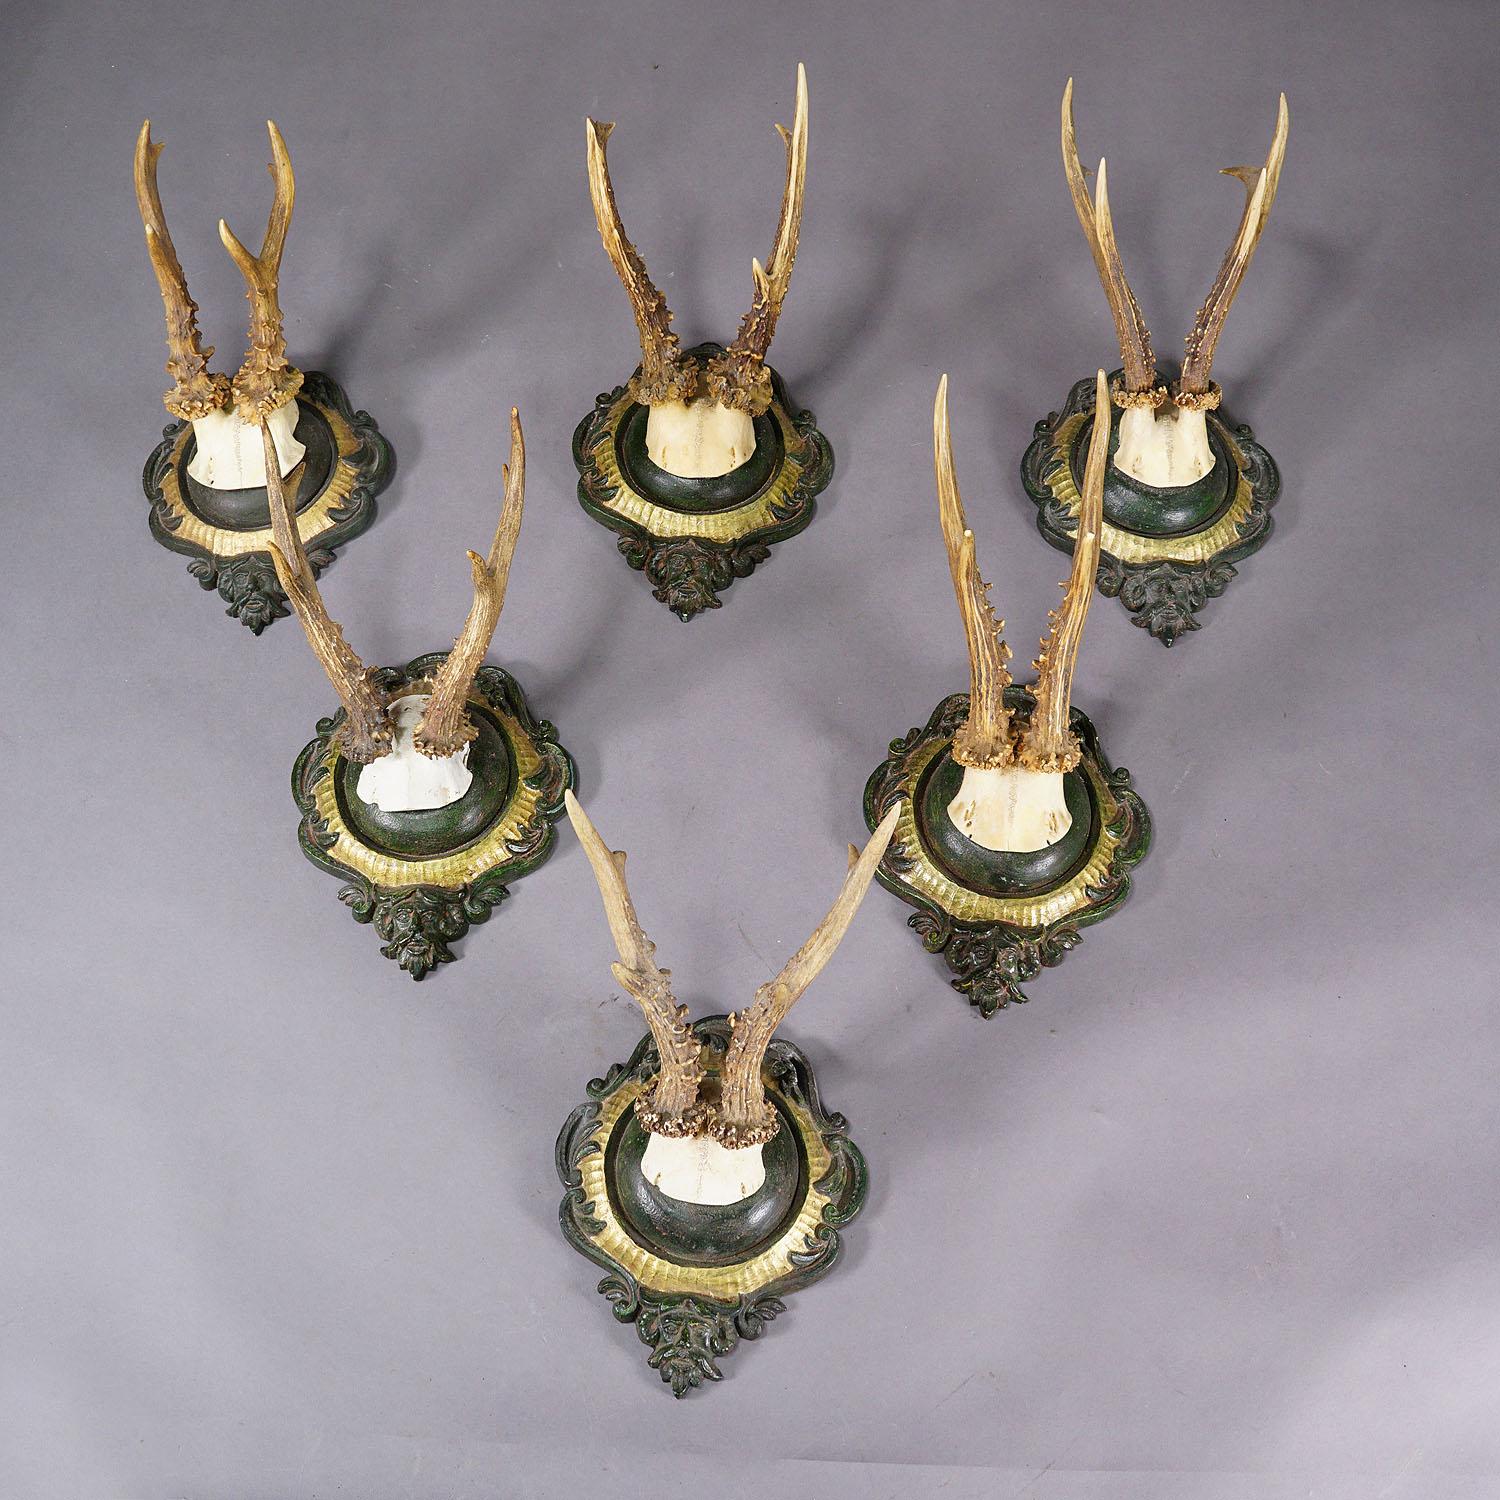 Rustic Six Large Vintage Deer Trophies on Plaster Plaques Germany ca. 1960s For Sale